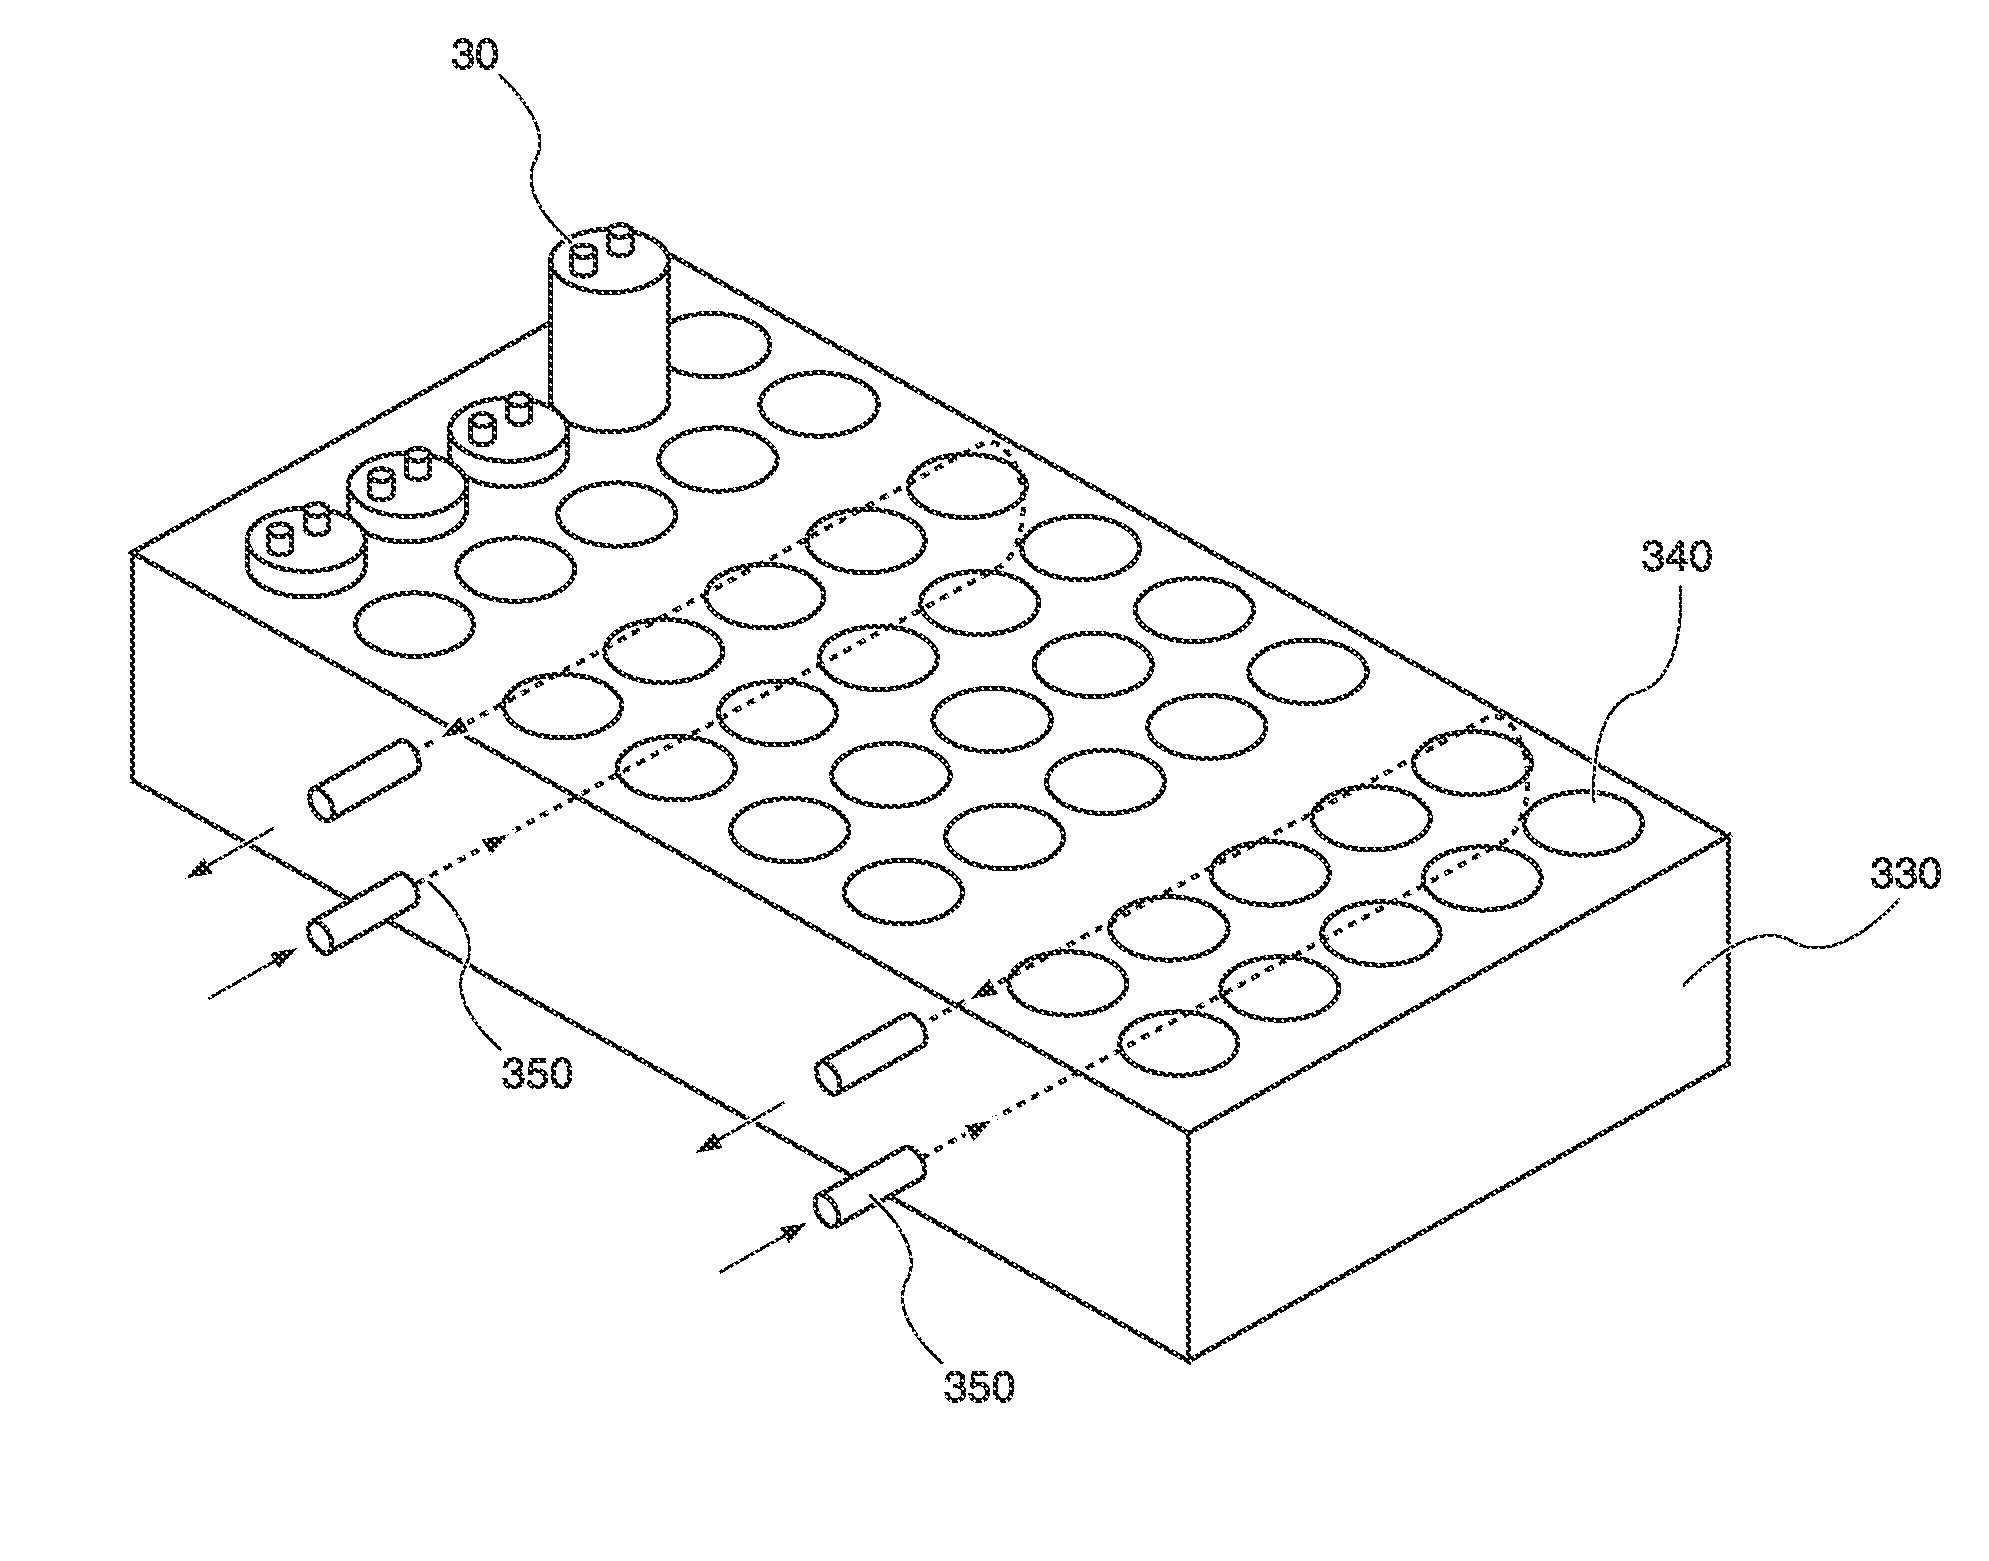 Active and passive cooling for an energy storage module